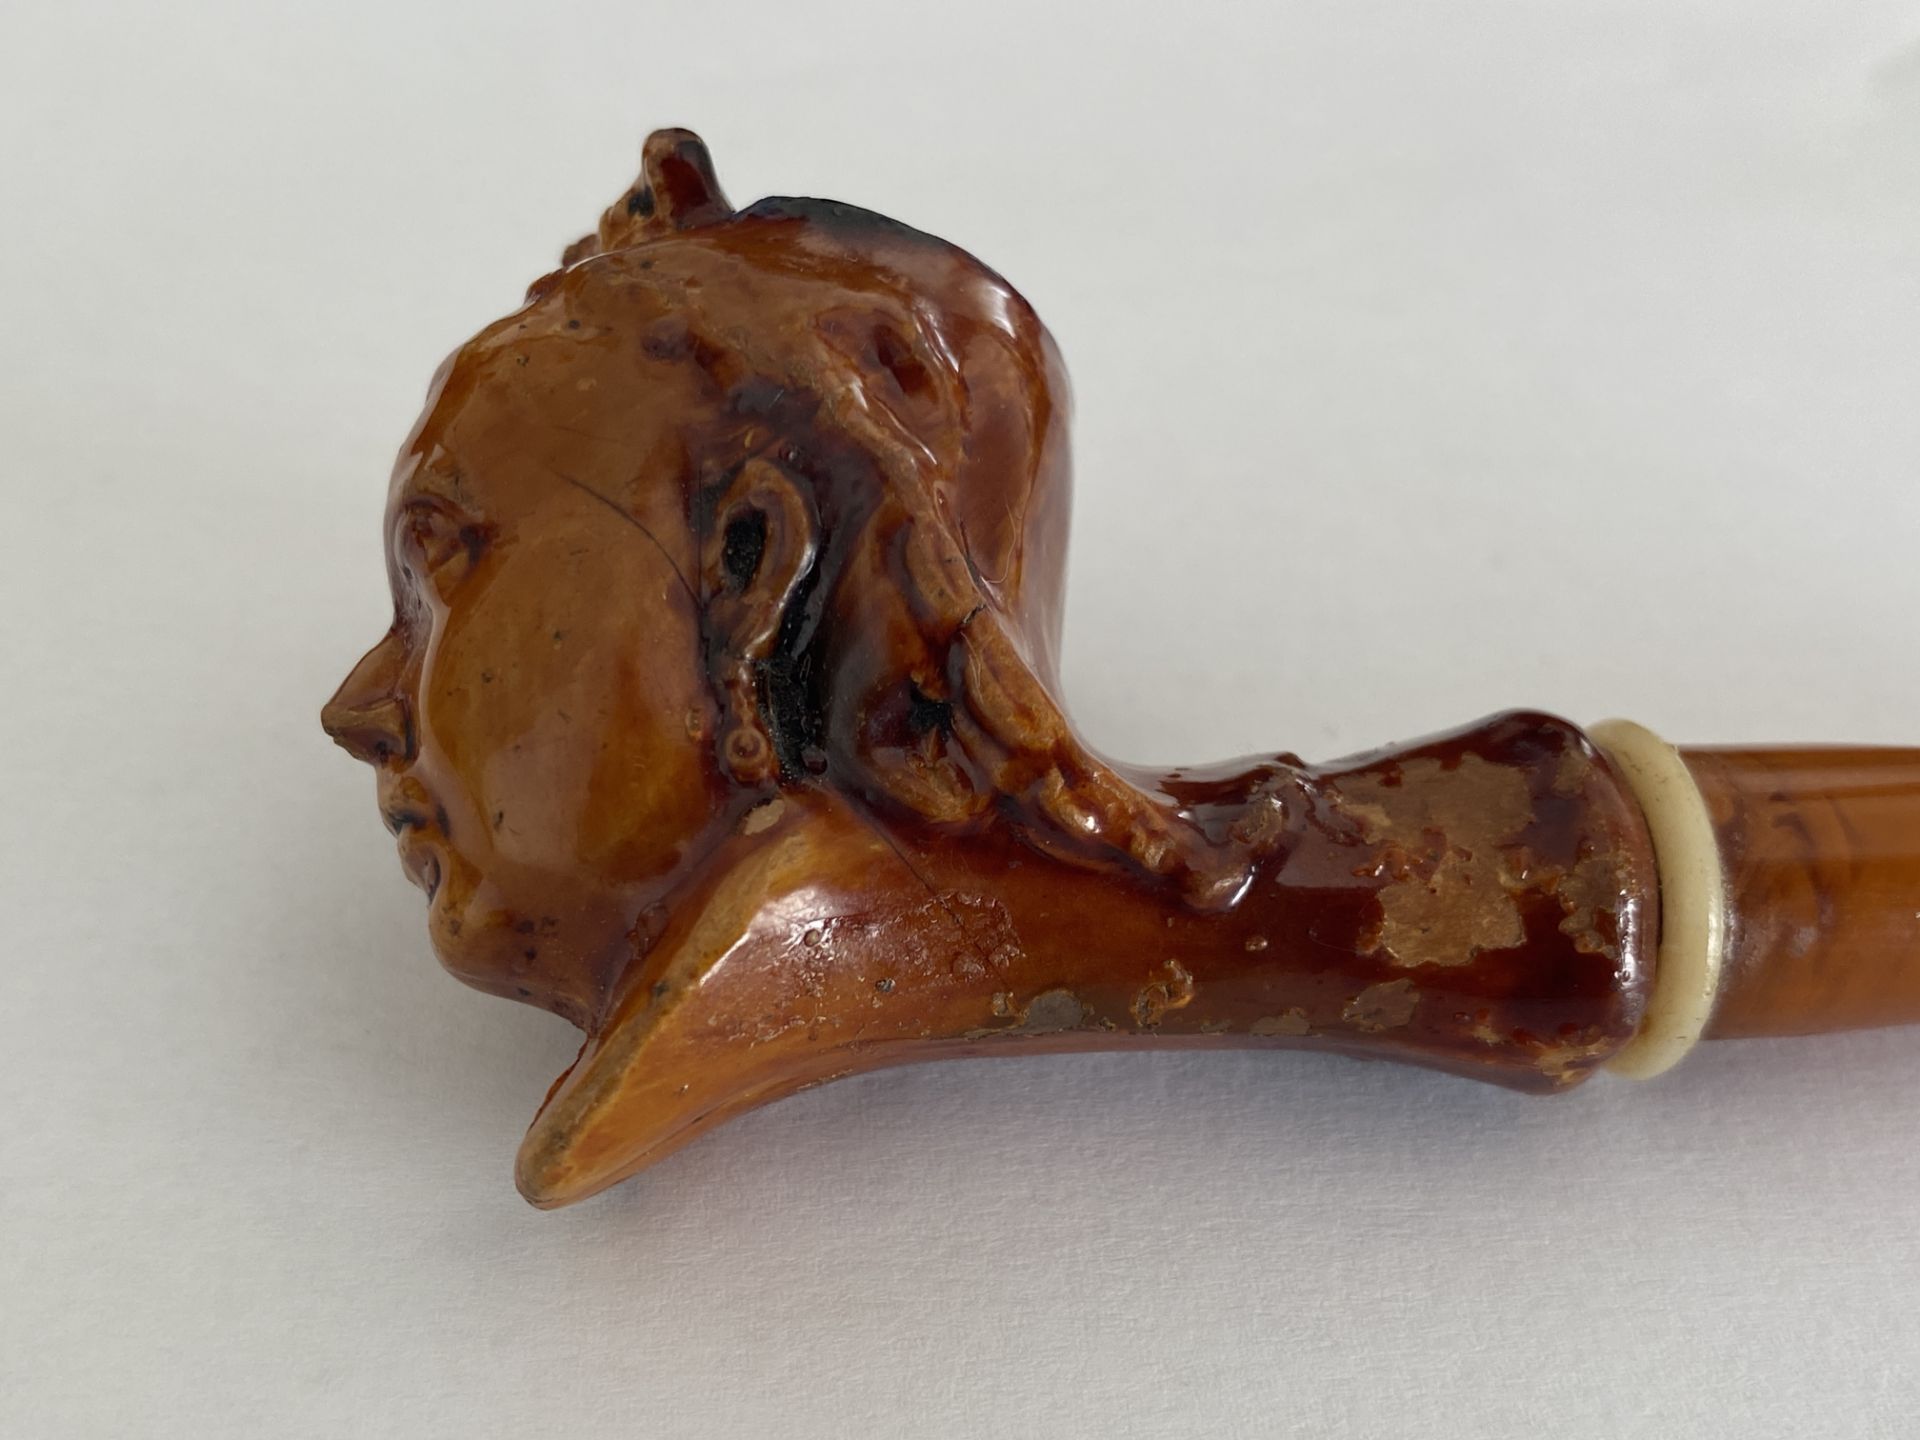 AN ANTIQUE BRITISH QUEEN VICTORIA TREACLE GLAZE TOBACCO PIPE WITH AMBER EFFECT PIPE, LENGTH 13 CM - Image 4 of 7